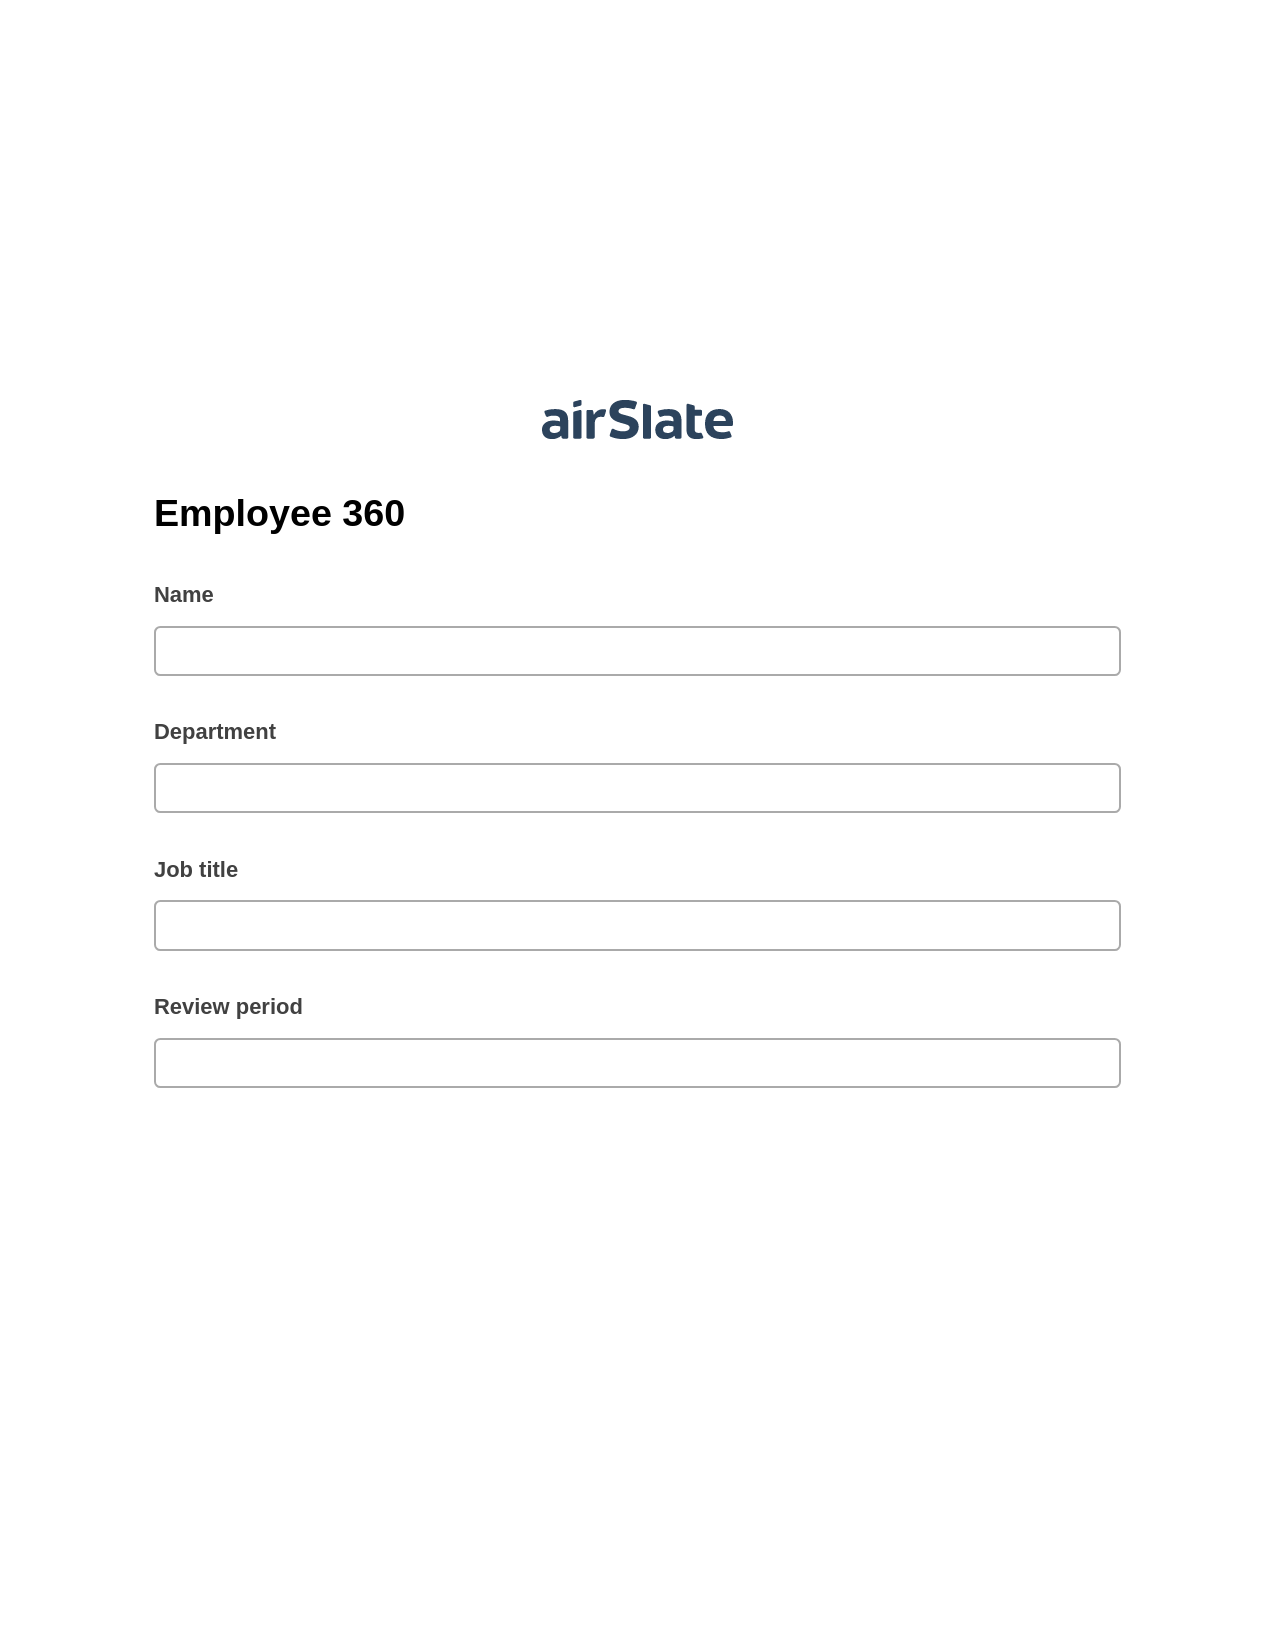 Multirole Employee 360 Prefill from NetSuite records, Set signature type addon, Export to WebMerge Bot